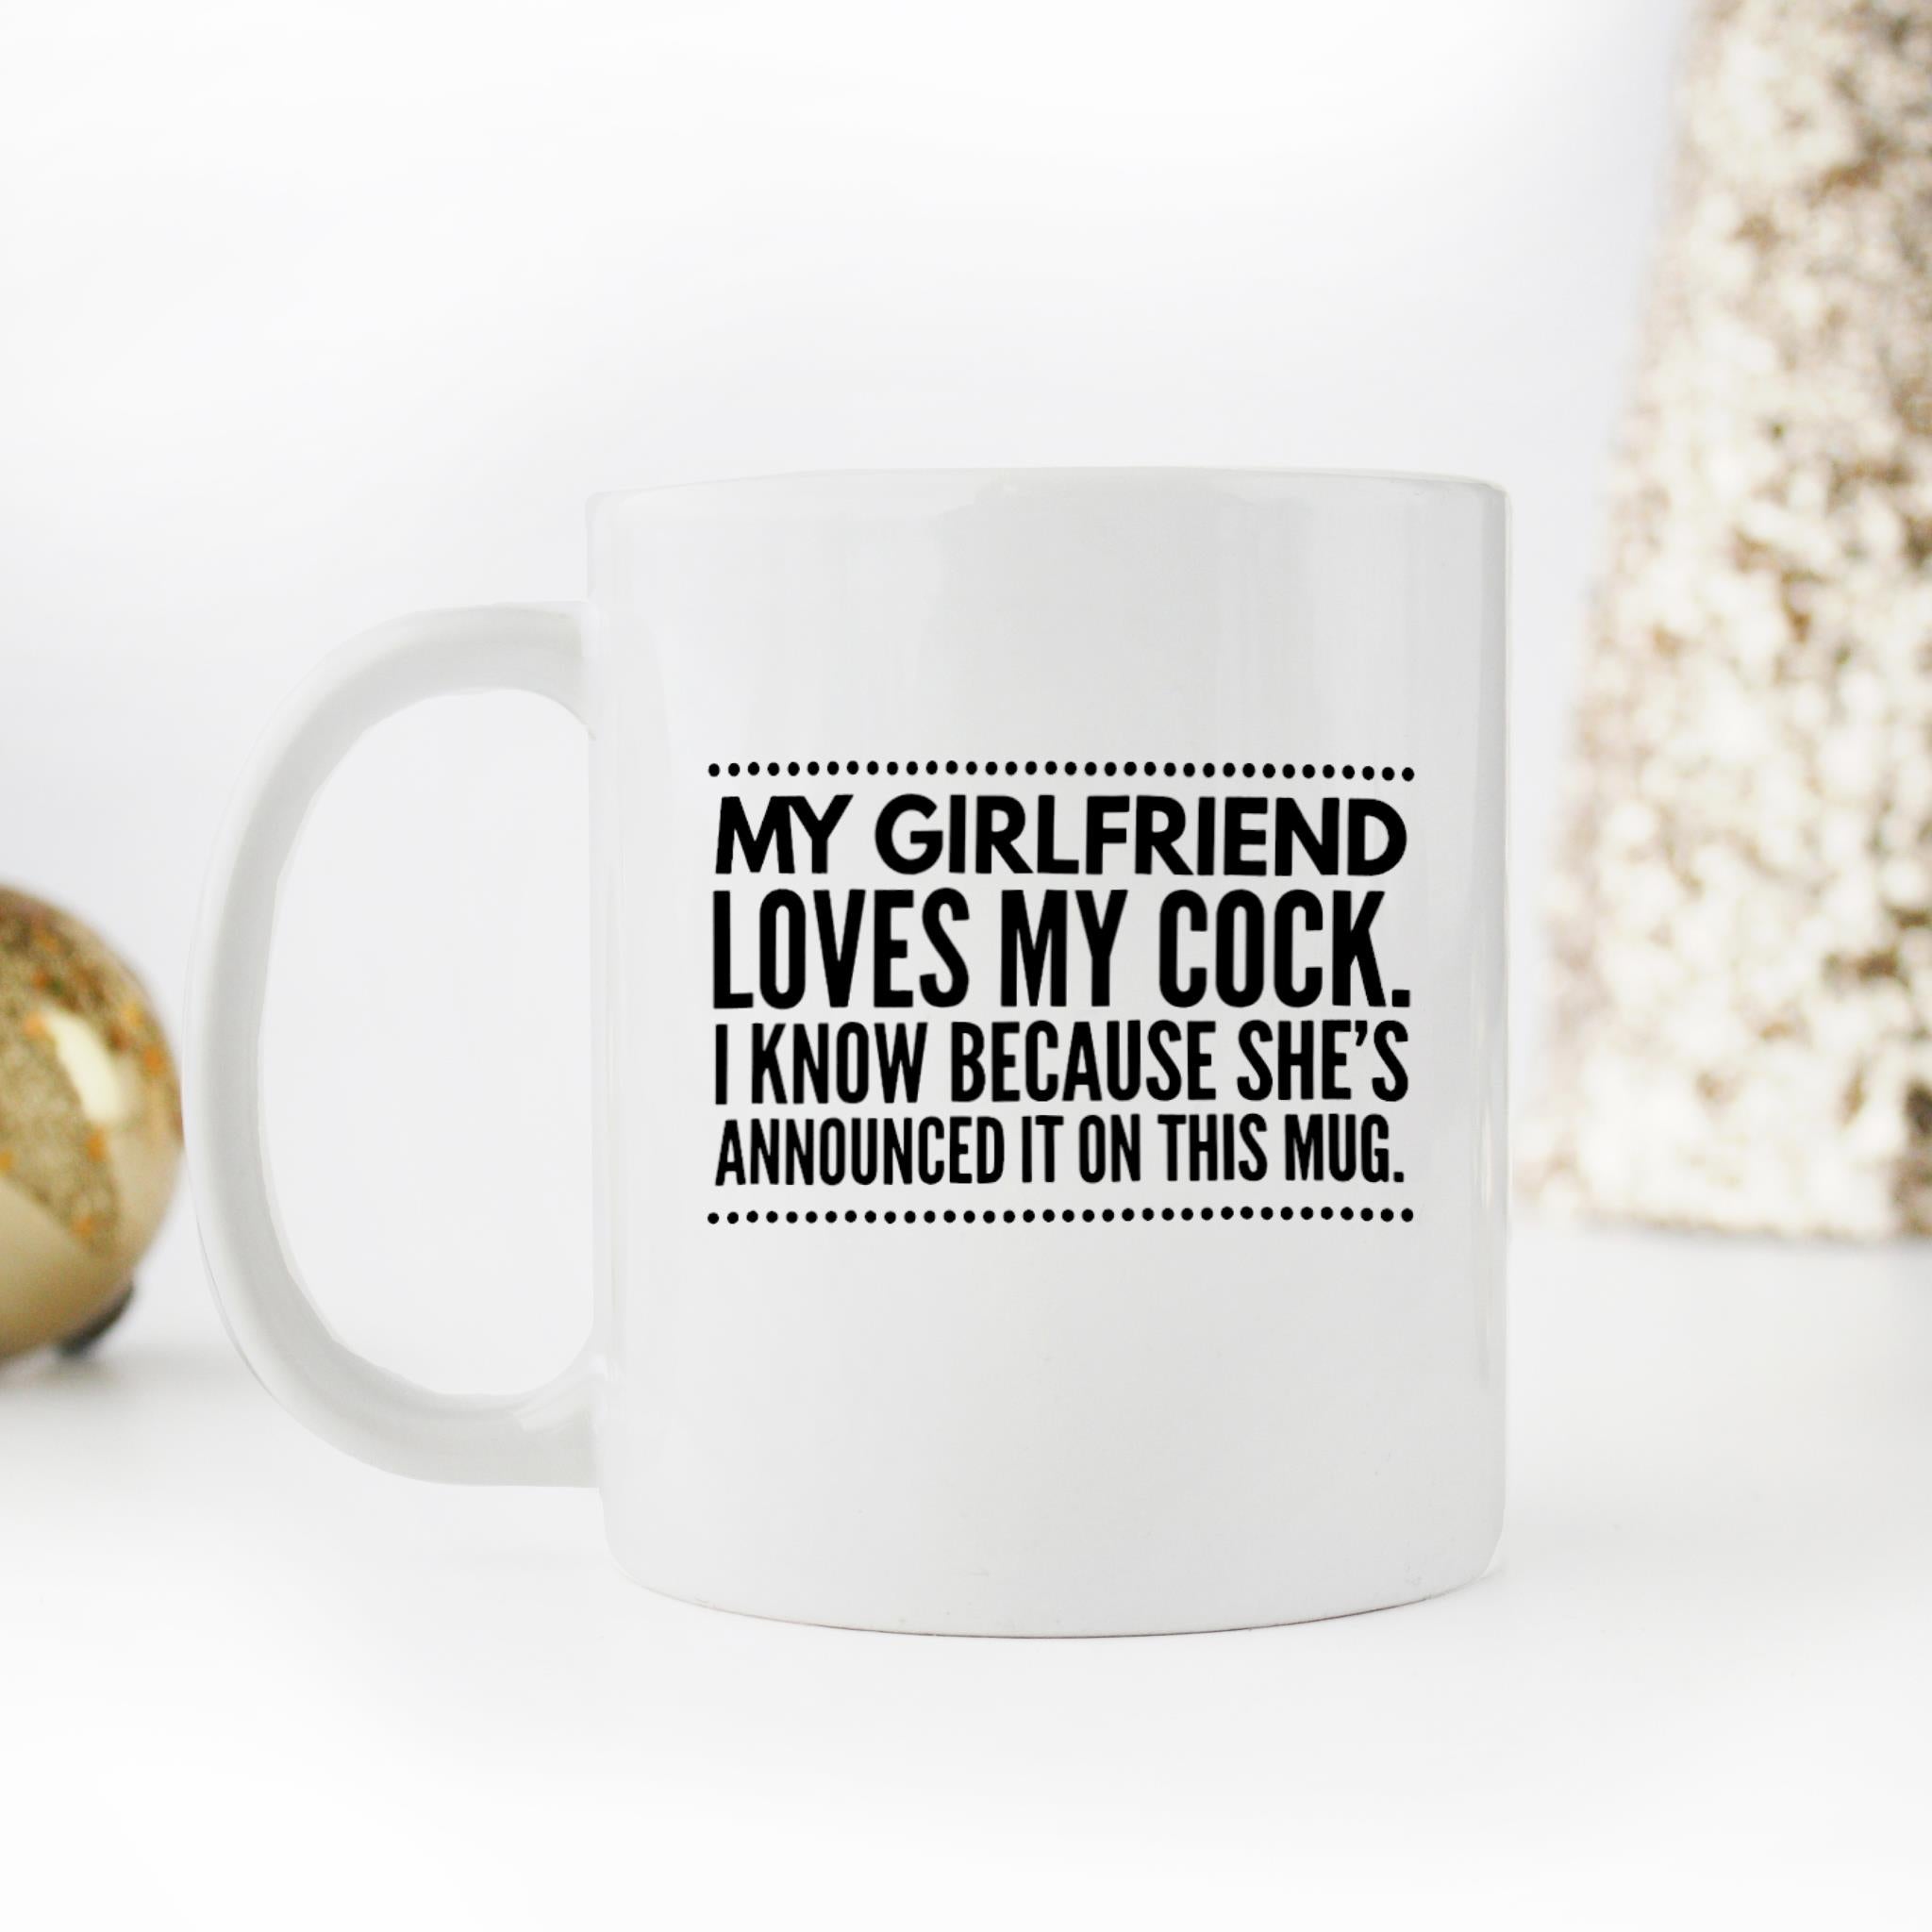 Skitongifts Funny Ceramic Novelty Coffee Mug Compliment Your Boyfriend With I Love Your Cock So Much I Announced It On This Ct3StjS